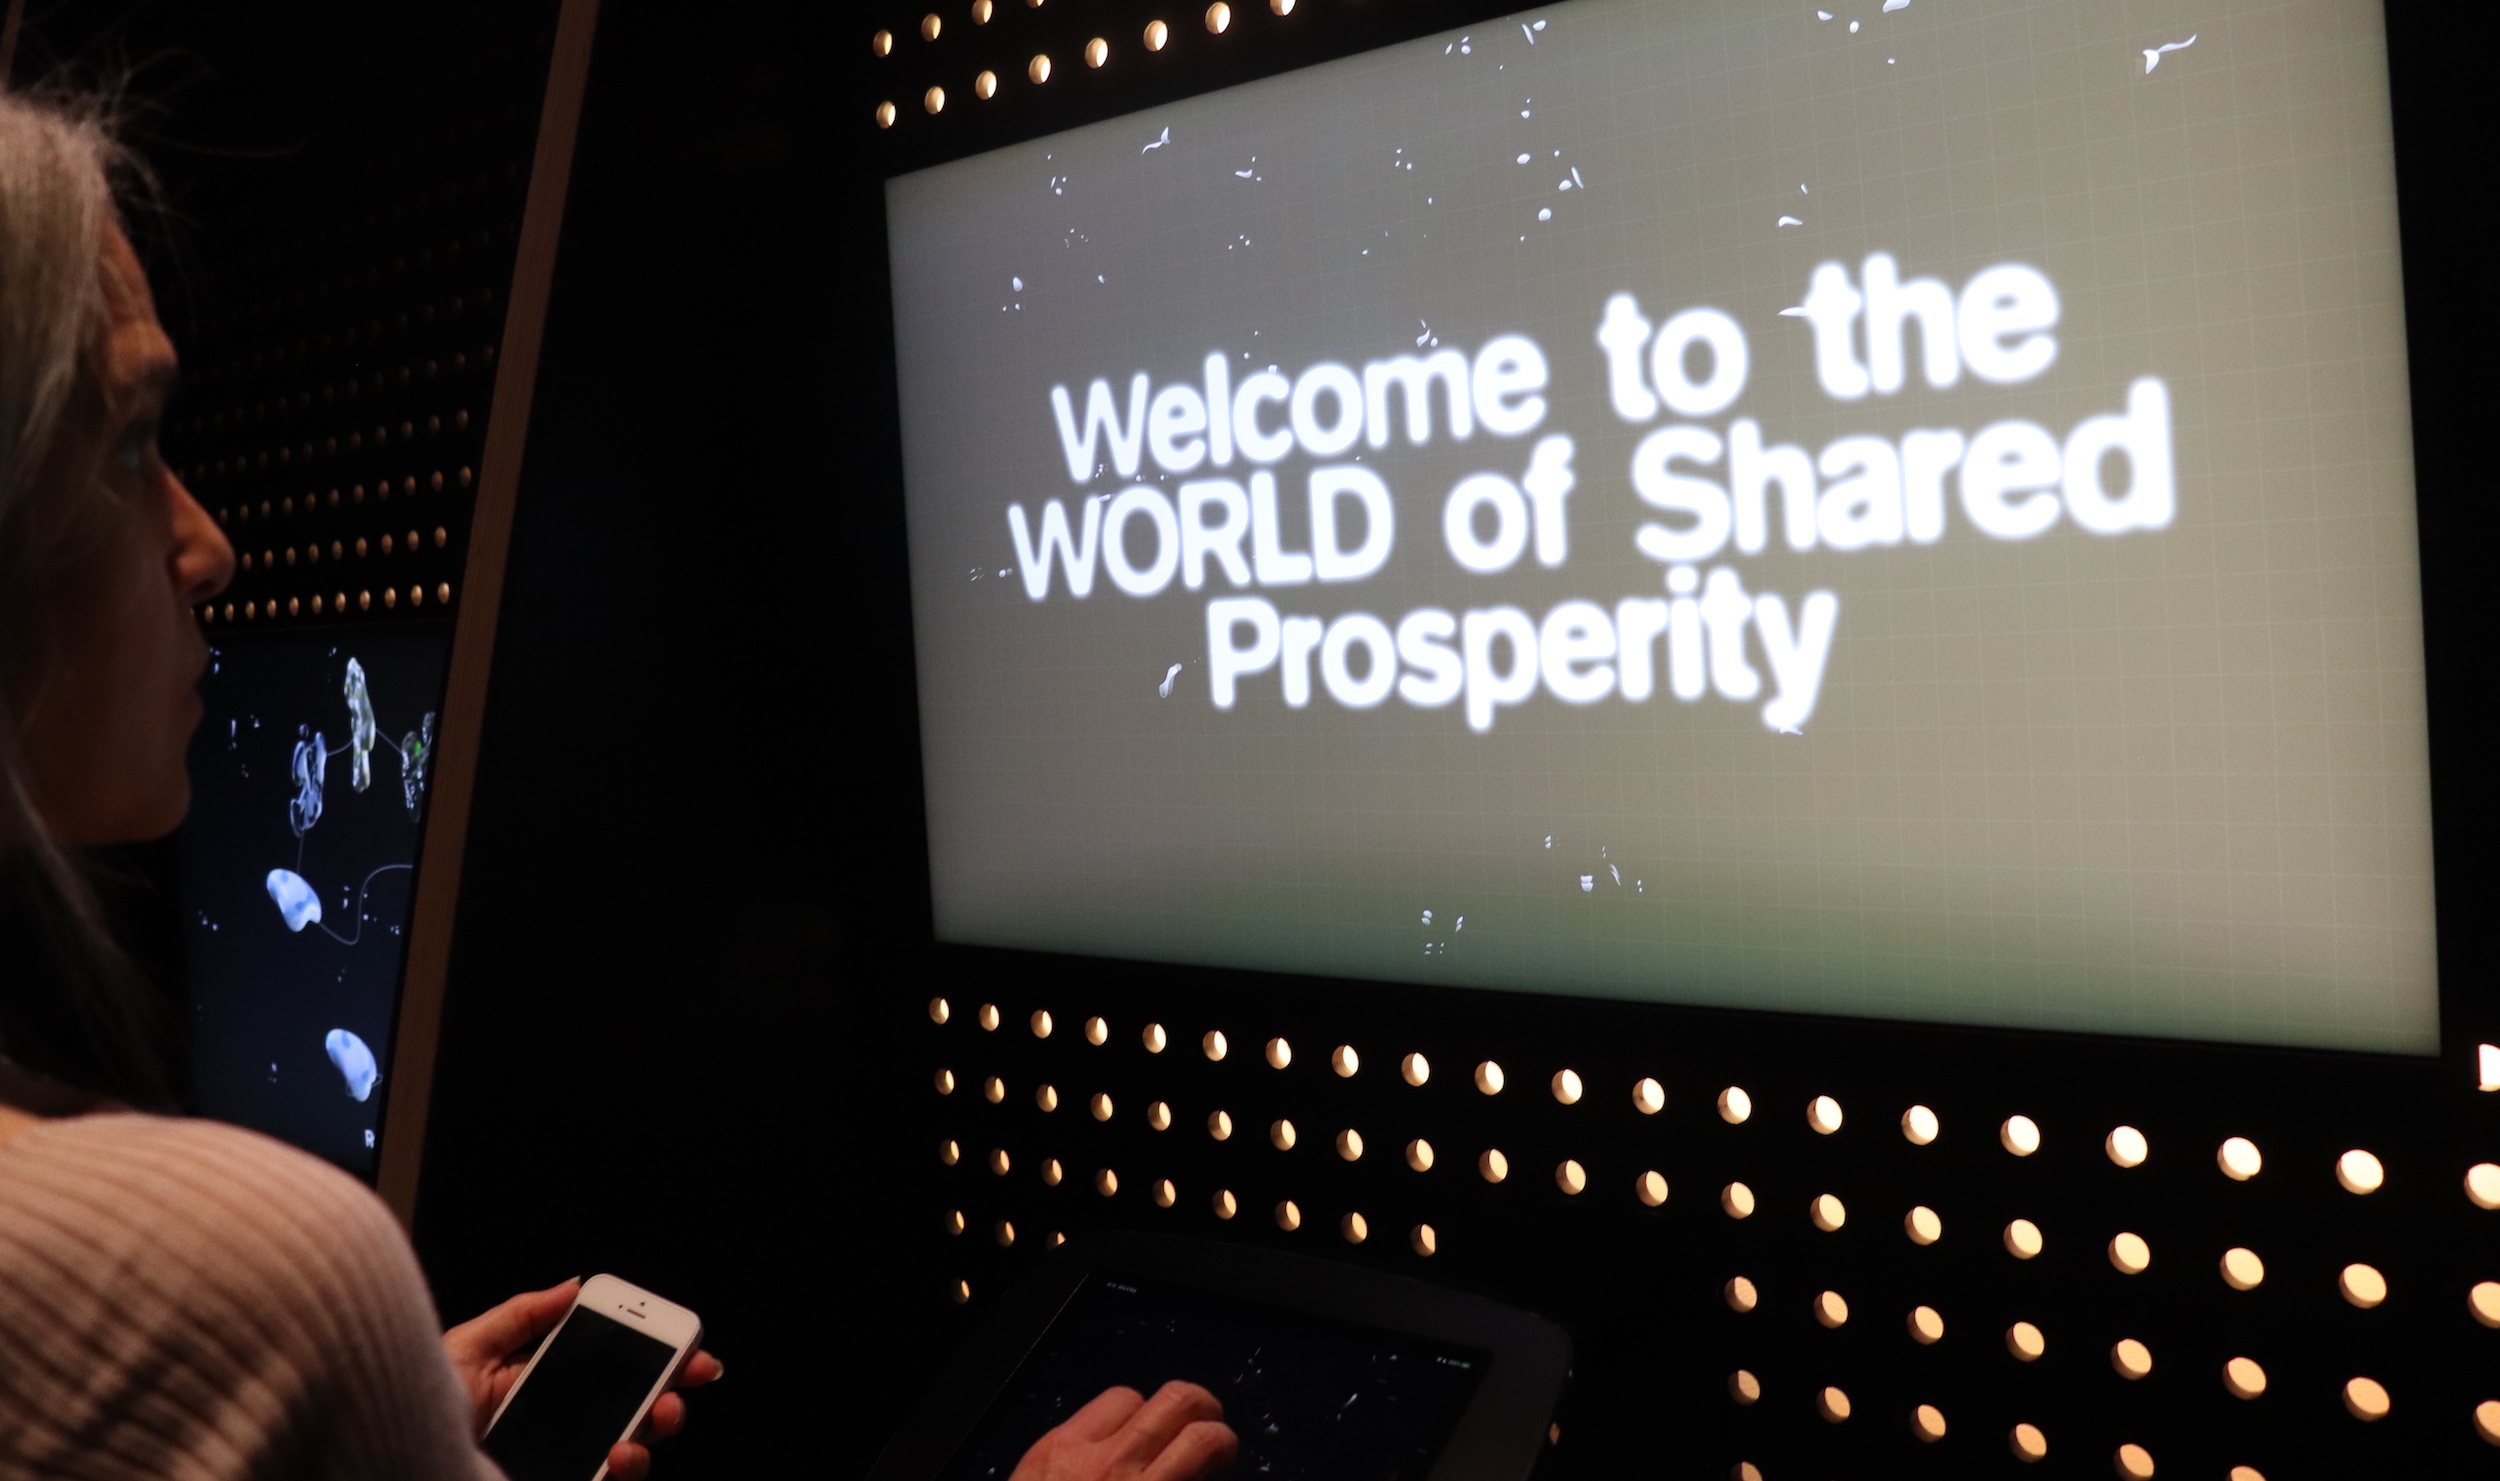 Welcome to the world of shared prosperity